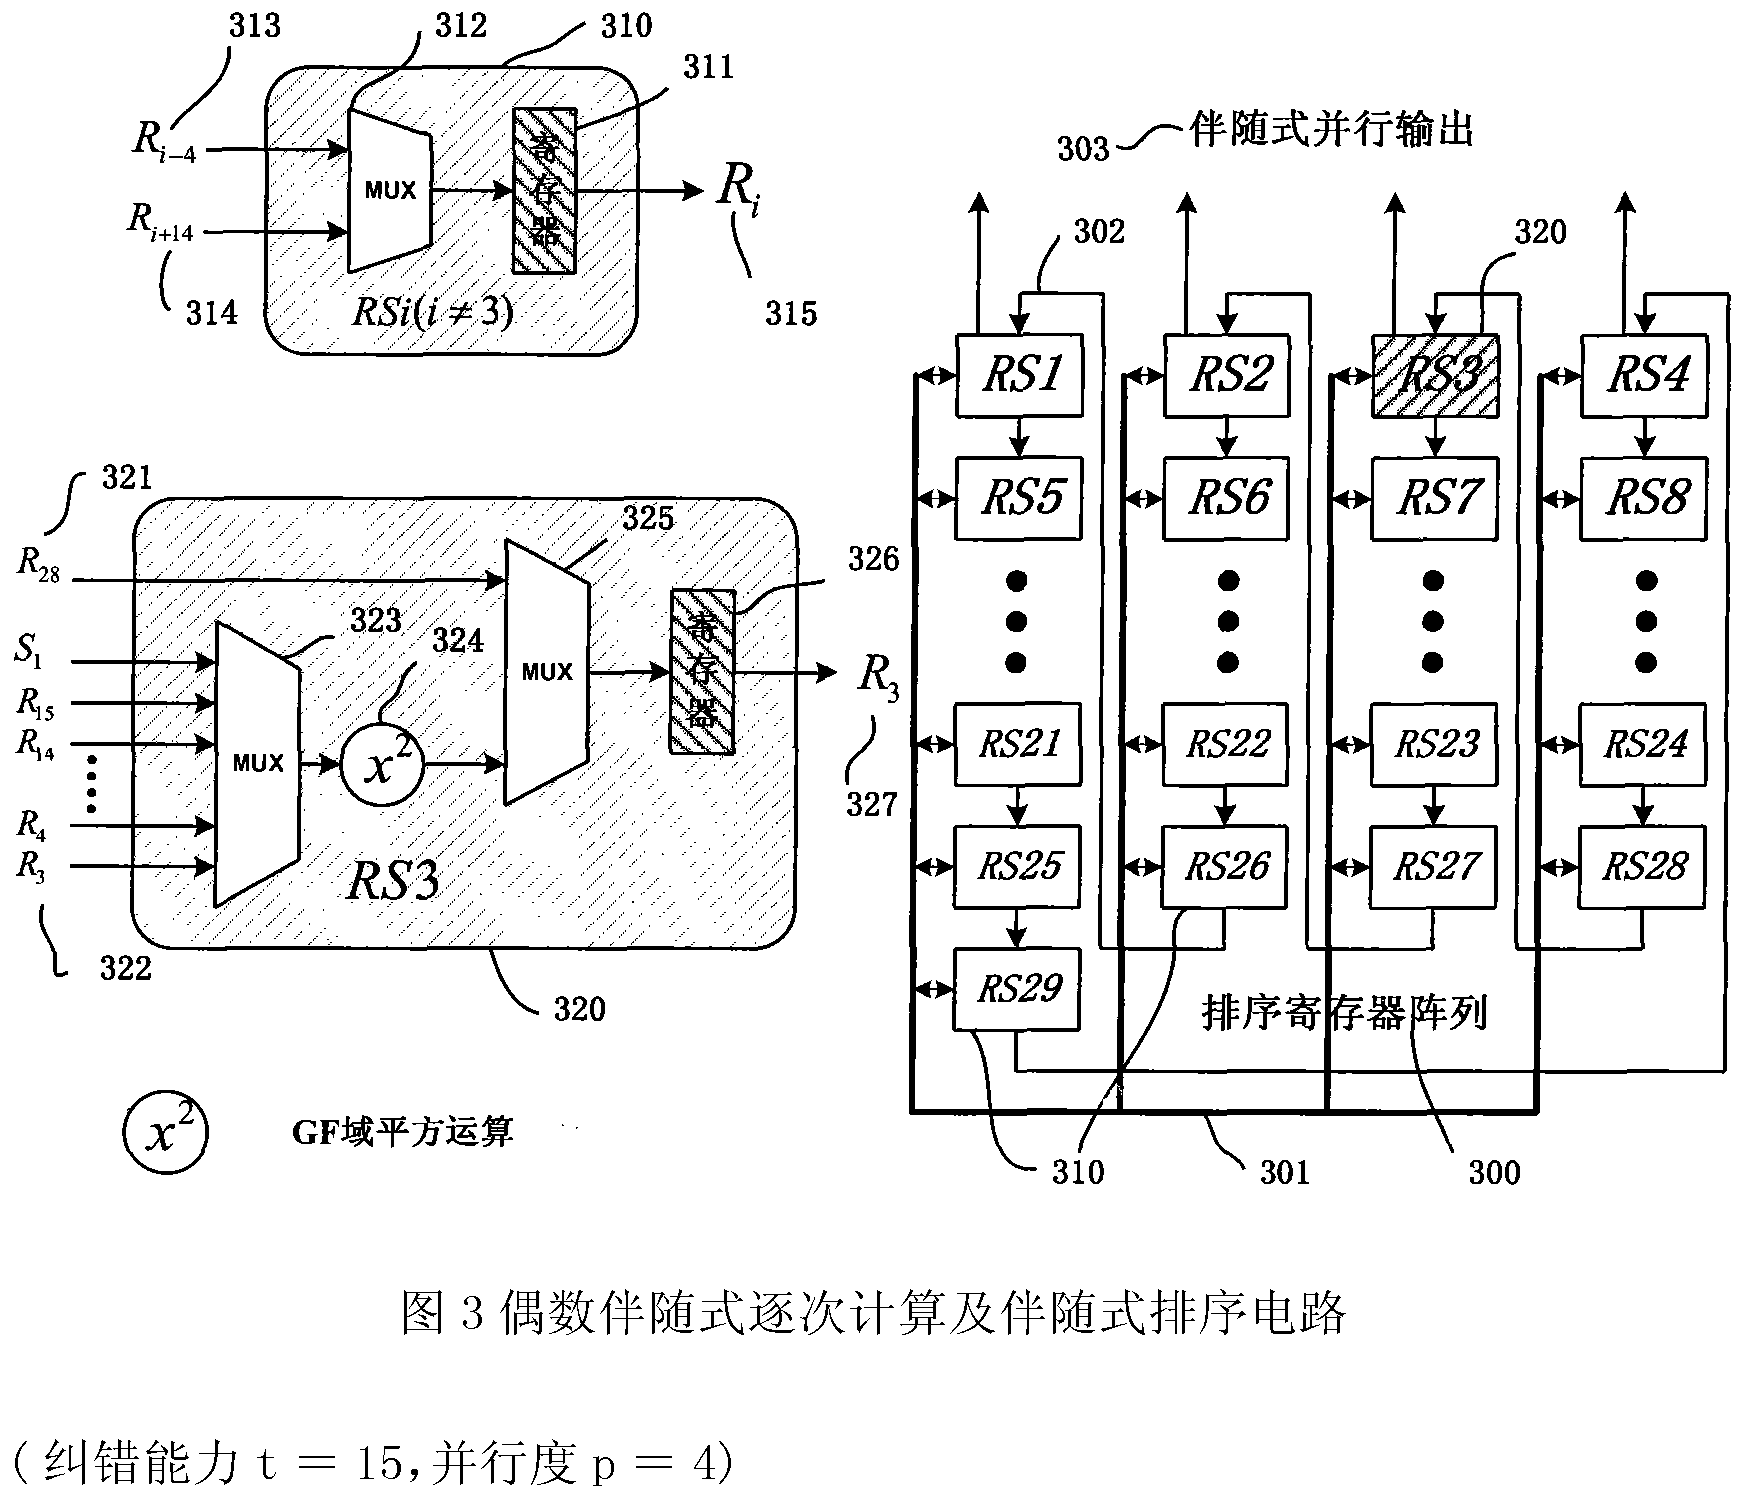 High-speed and low-delay Berlekamp-Massey iteration decoding circuit for broadcast channel (BCH) decoder